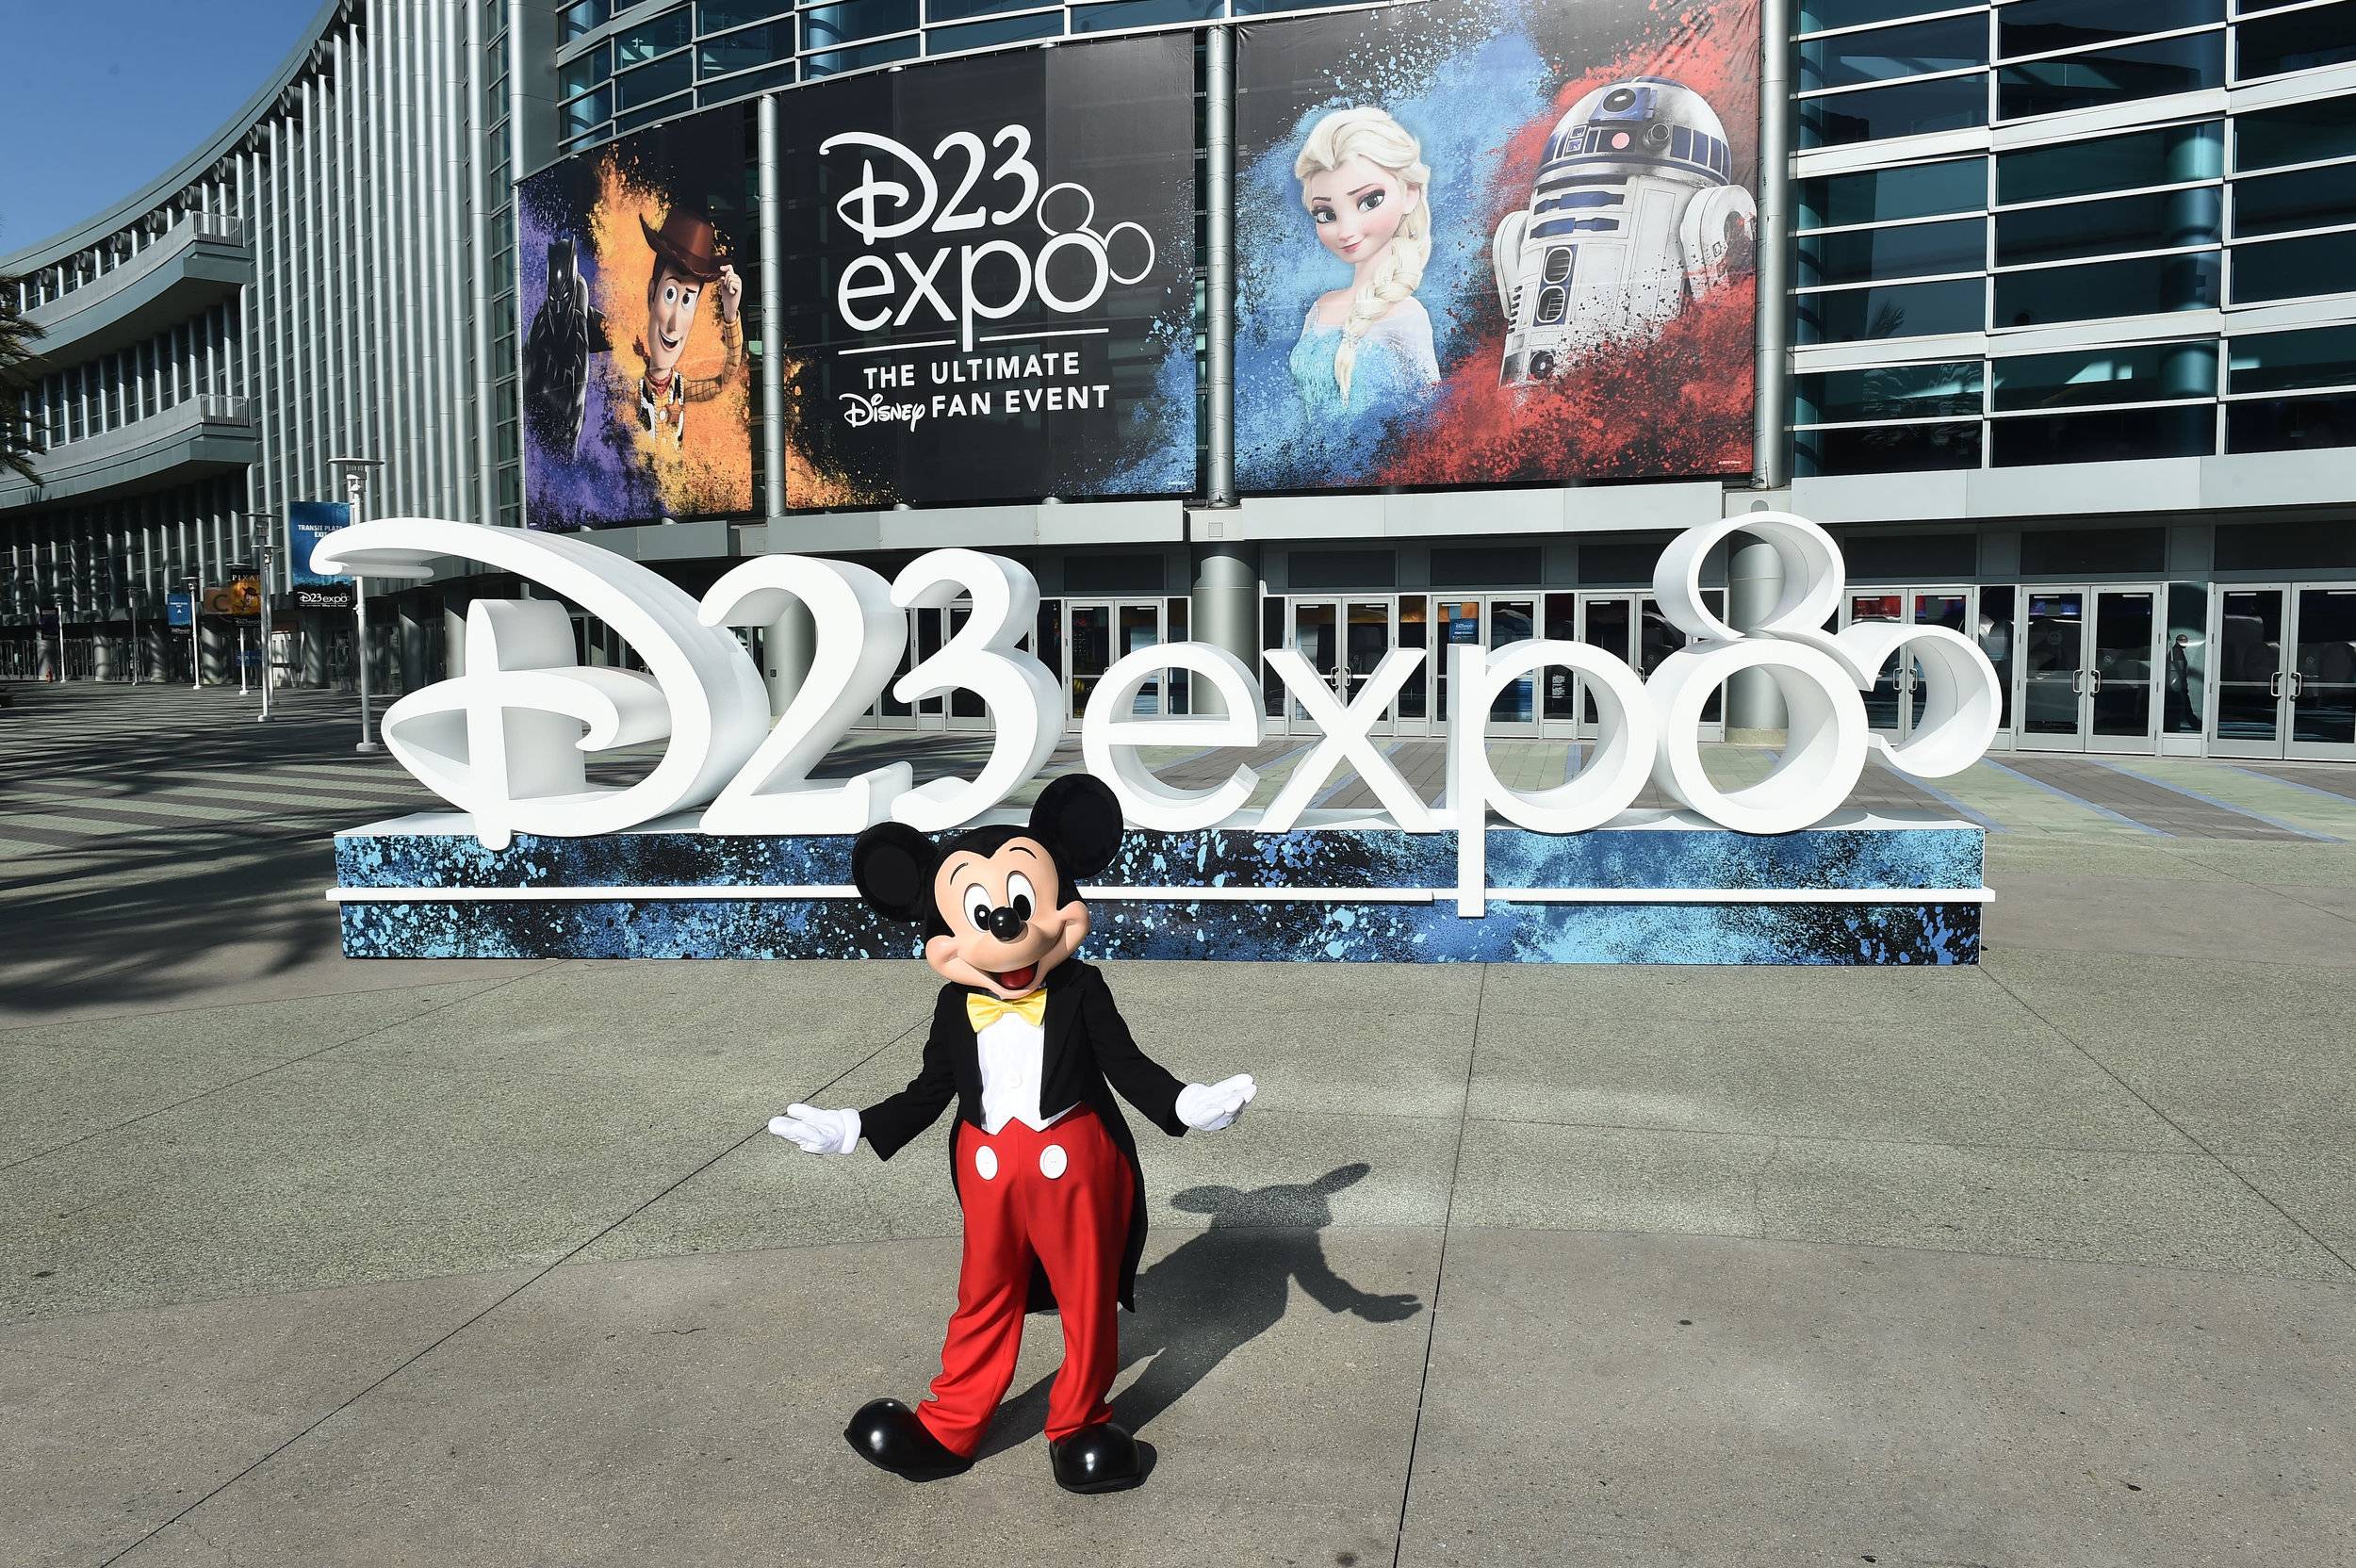 D23 Expo takes place September 9 - 11 2022